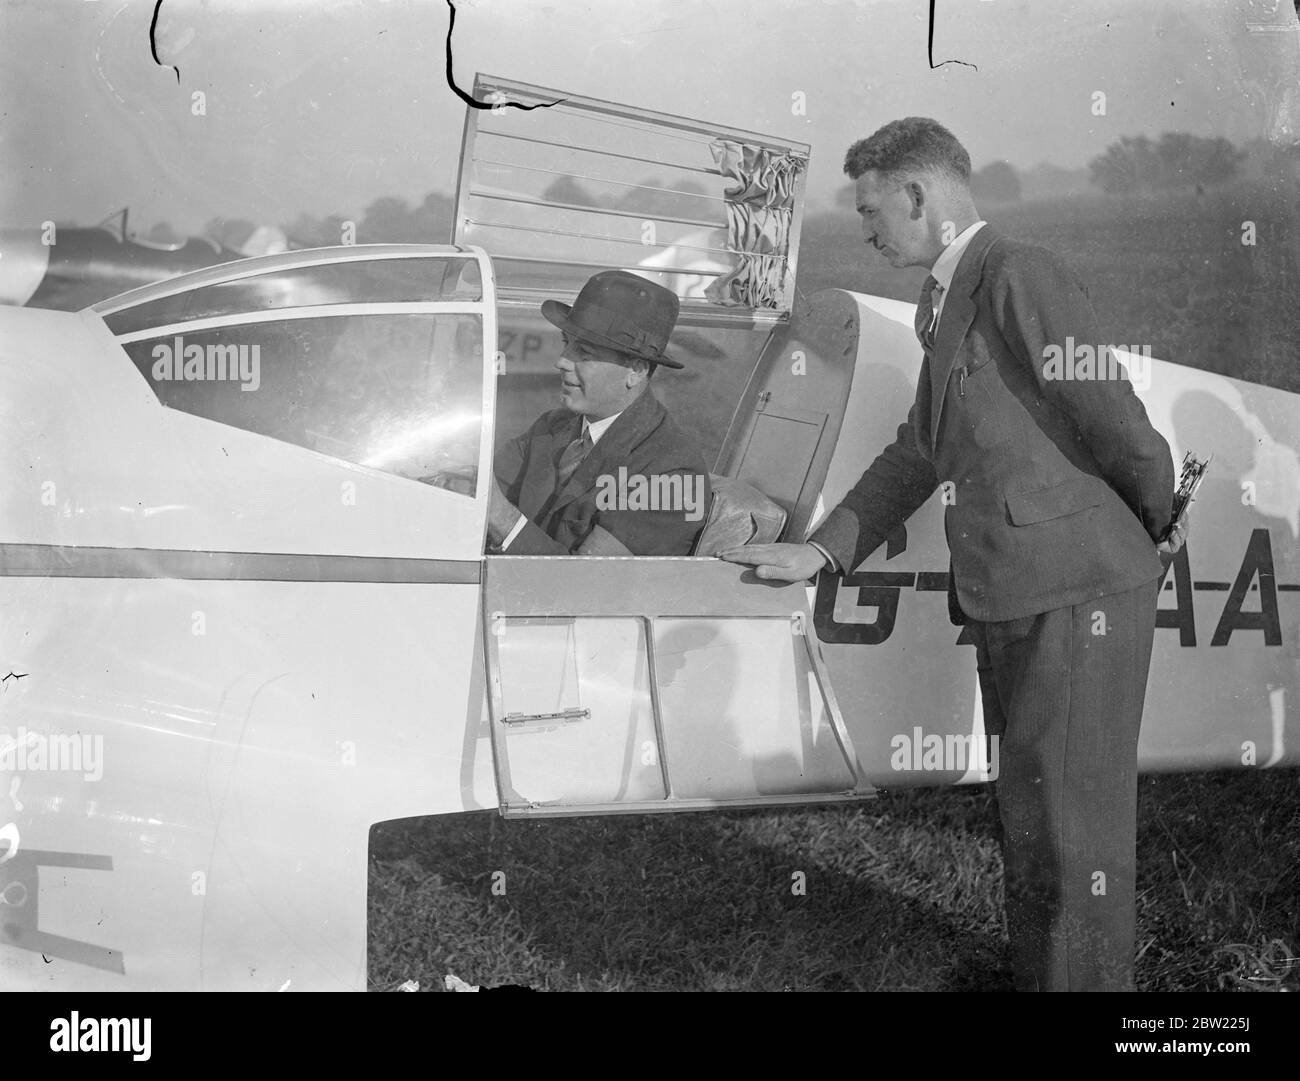 Captain E.W. Percival, the aircraft designer, in his Mew Gull as he was about to takeoff 27 planes took off from the Hatfield aerodrome in the eliminating round of the Kings cup airbase. The course is 786 mile journey round Britain.. 10 September 1937 Stock Photo